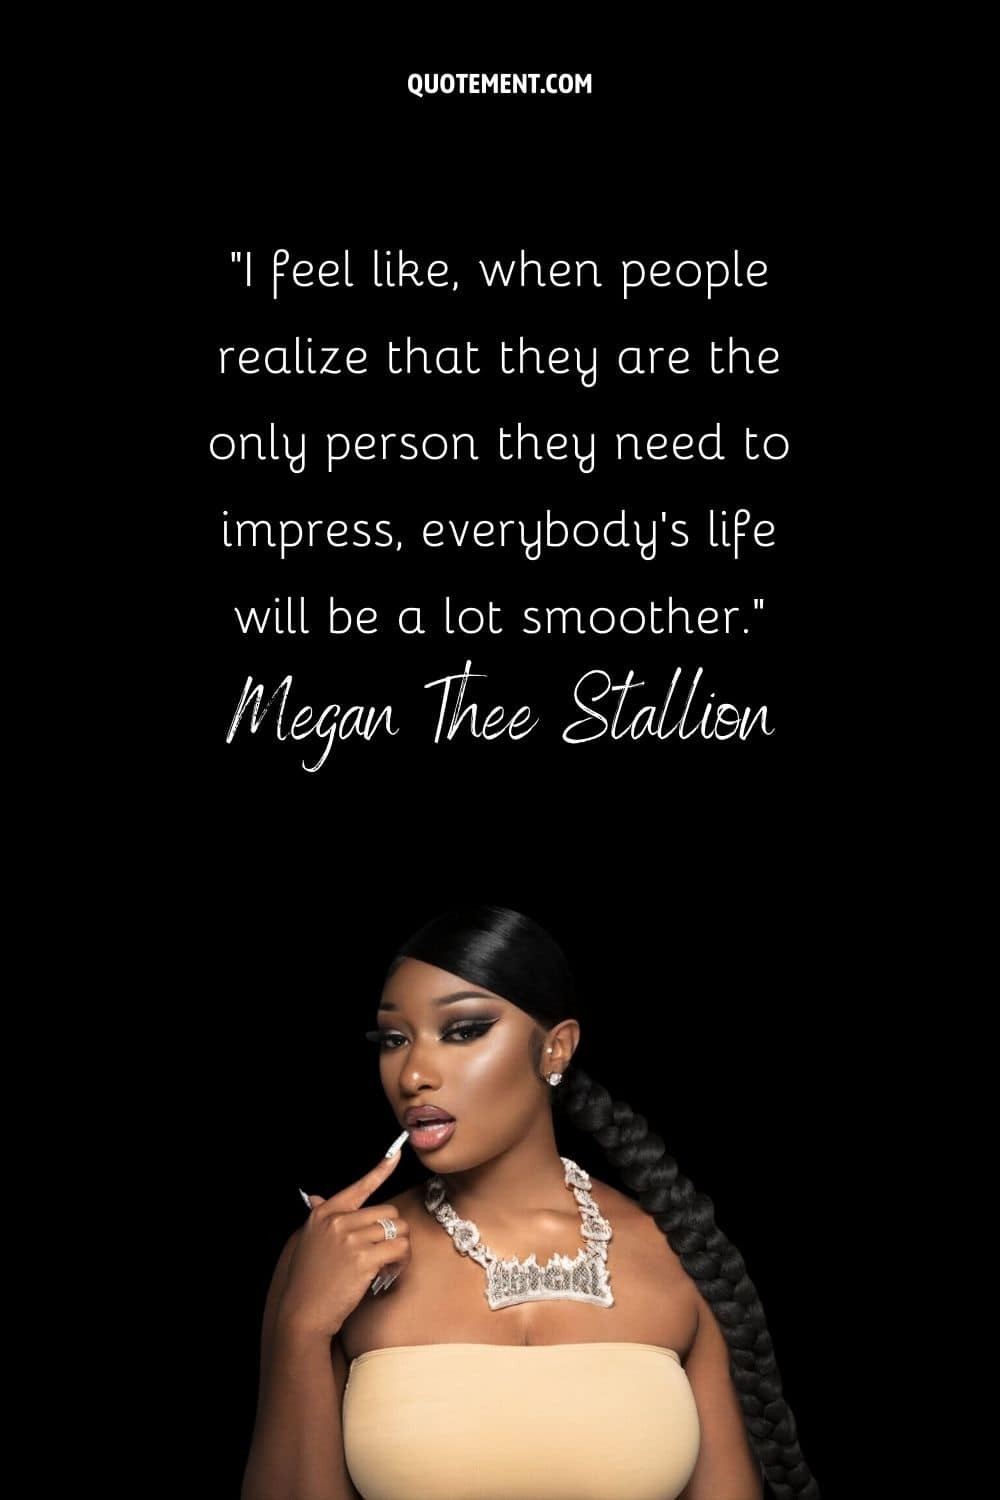 “I feel like, when people realize that they are the only person they need to impress, everybody's life will be a lot smoother.” — Megan Thee Stallion